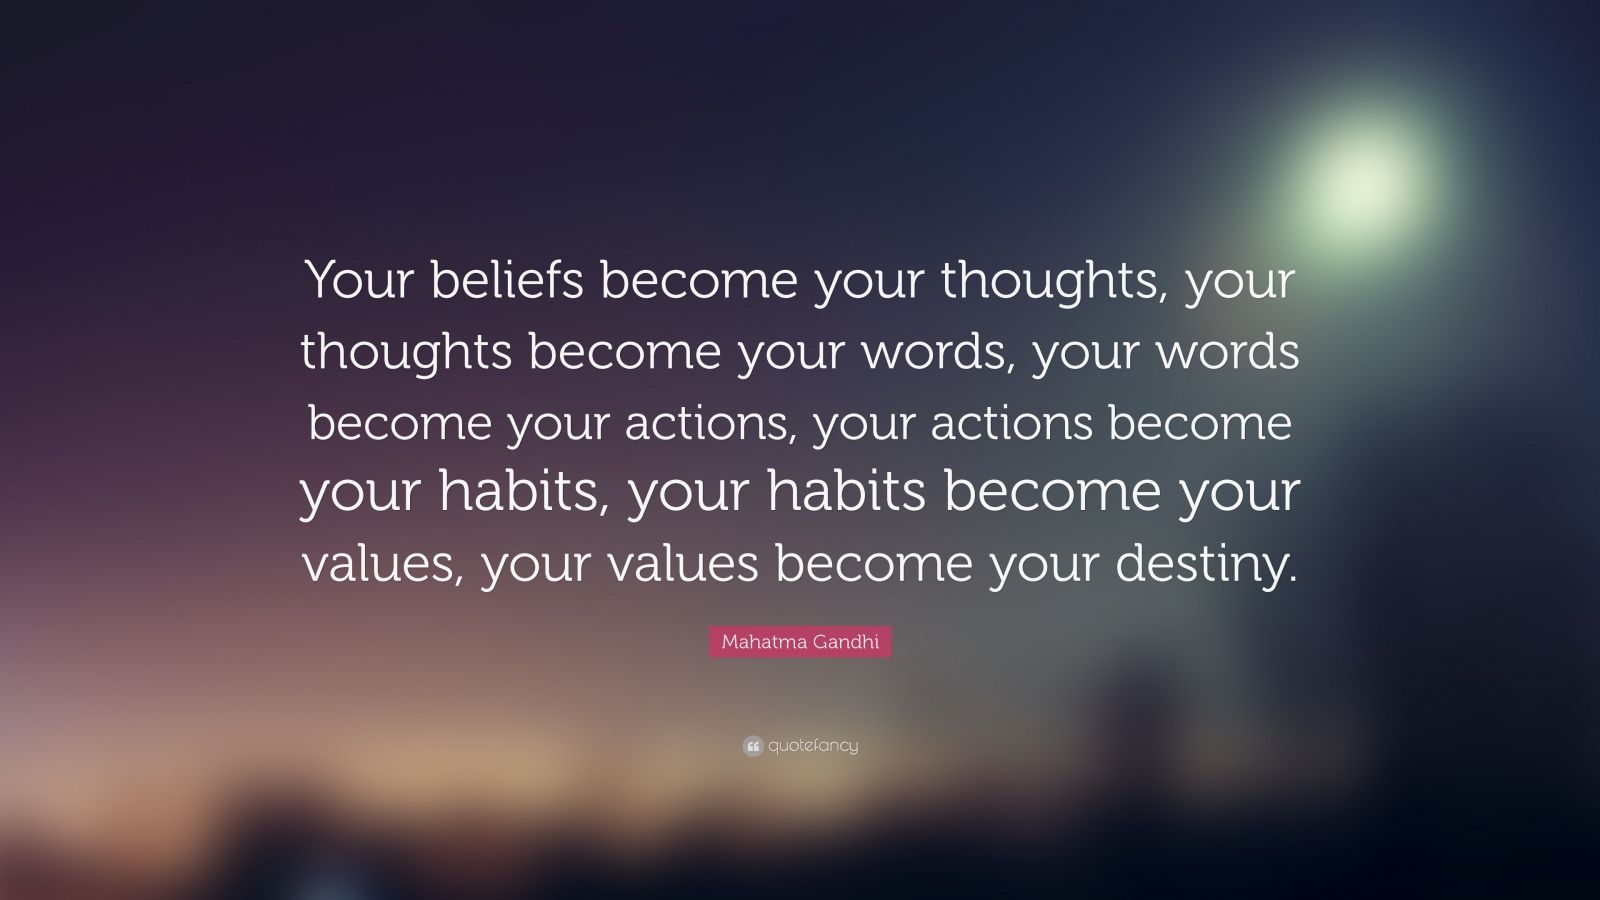 Mahatma Gandhi Quote: “Your beliefs become your thoughts, your thoughts